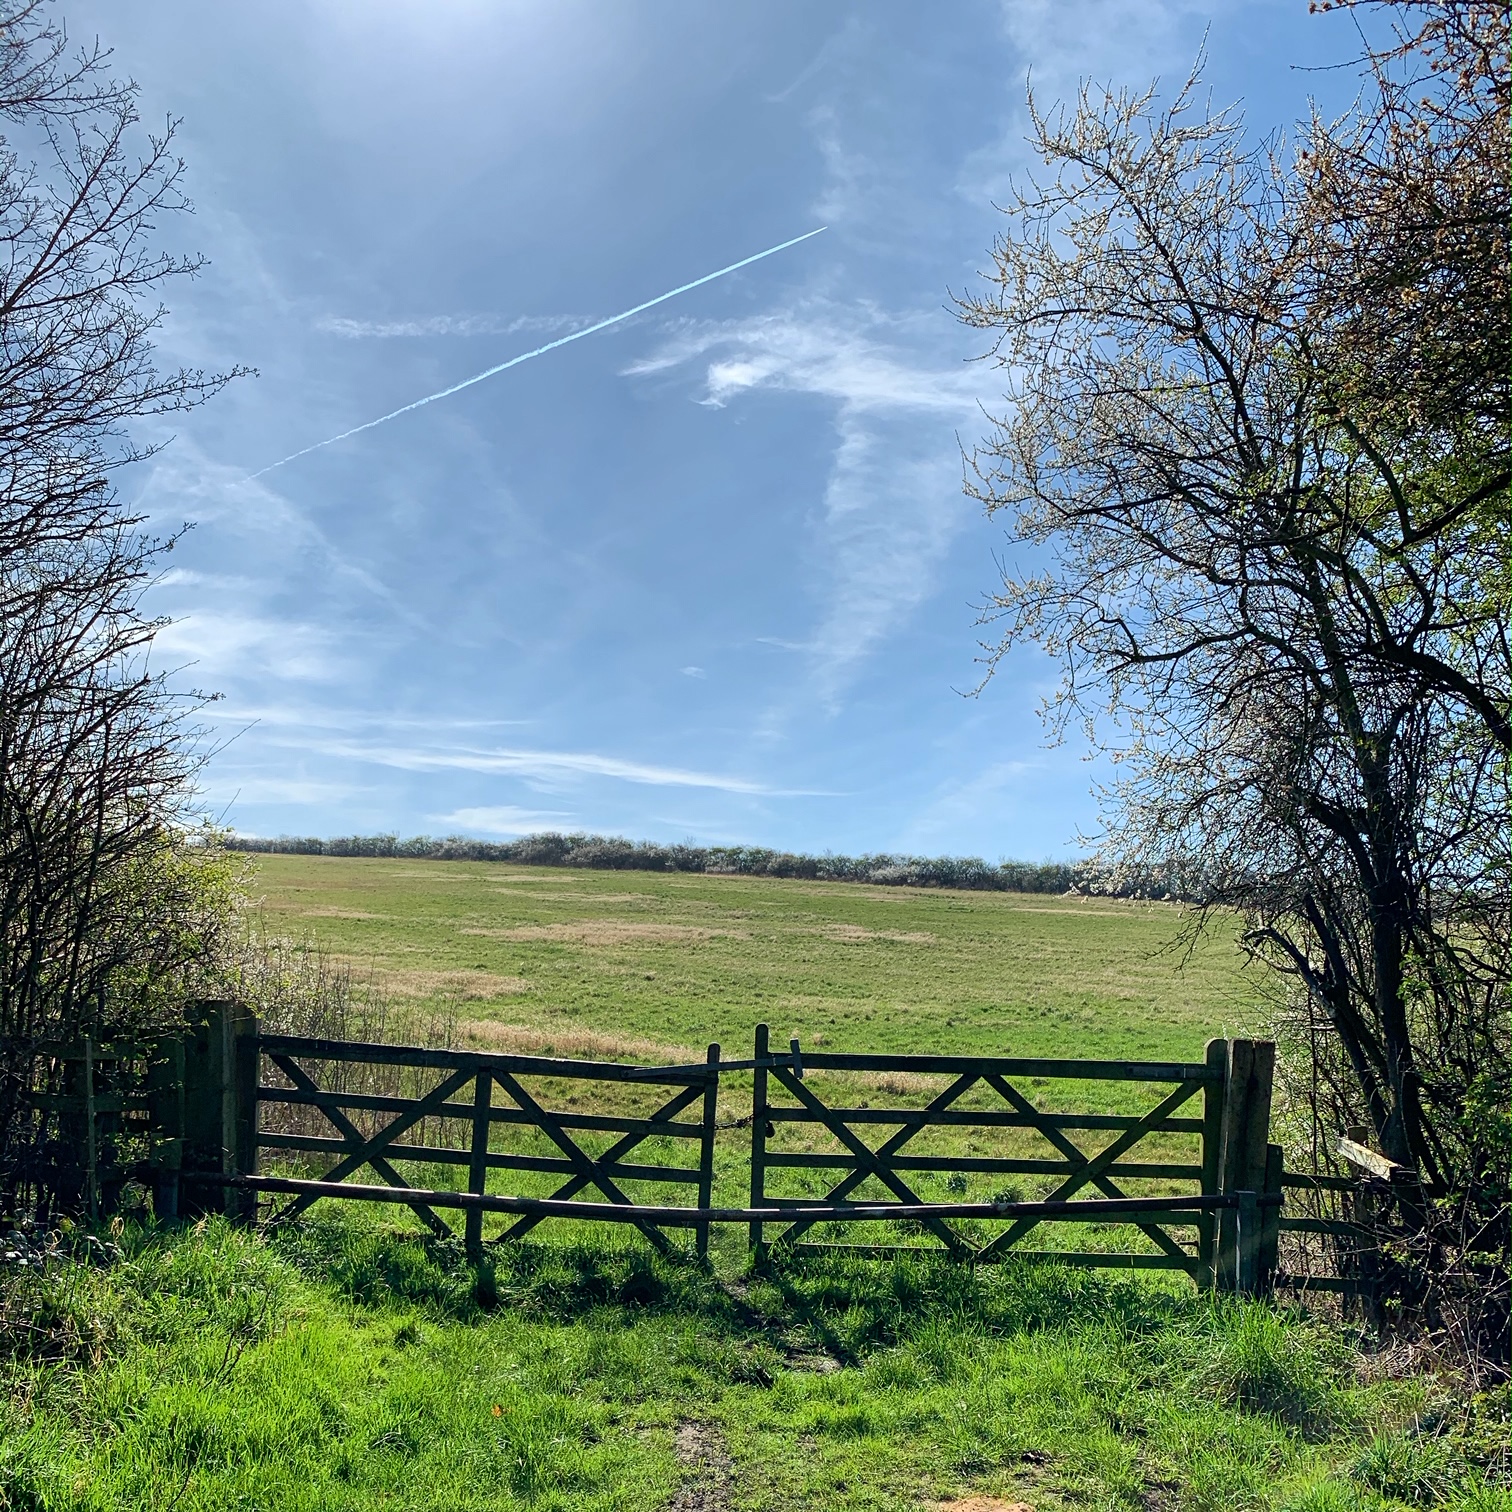 Image : A photograph of a country gate, leading to a grassy field and a horizon of blue.